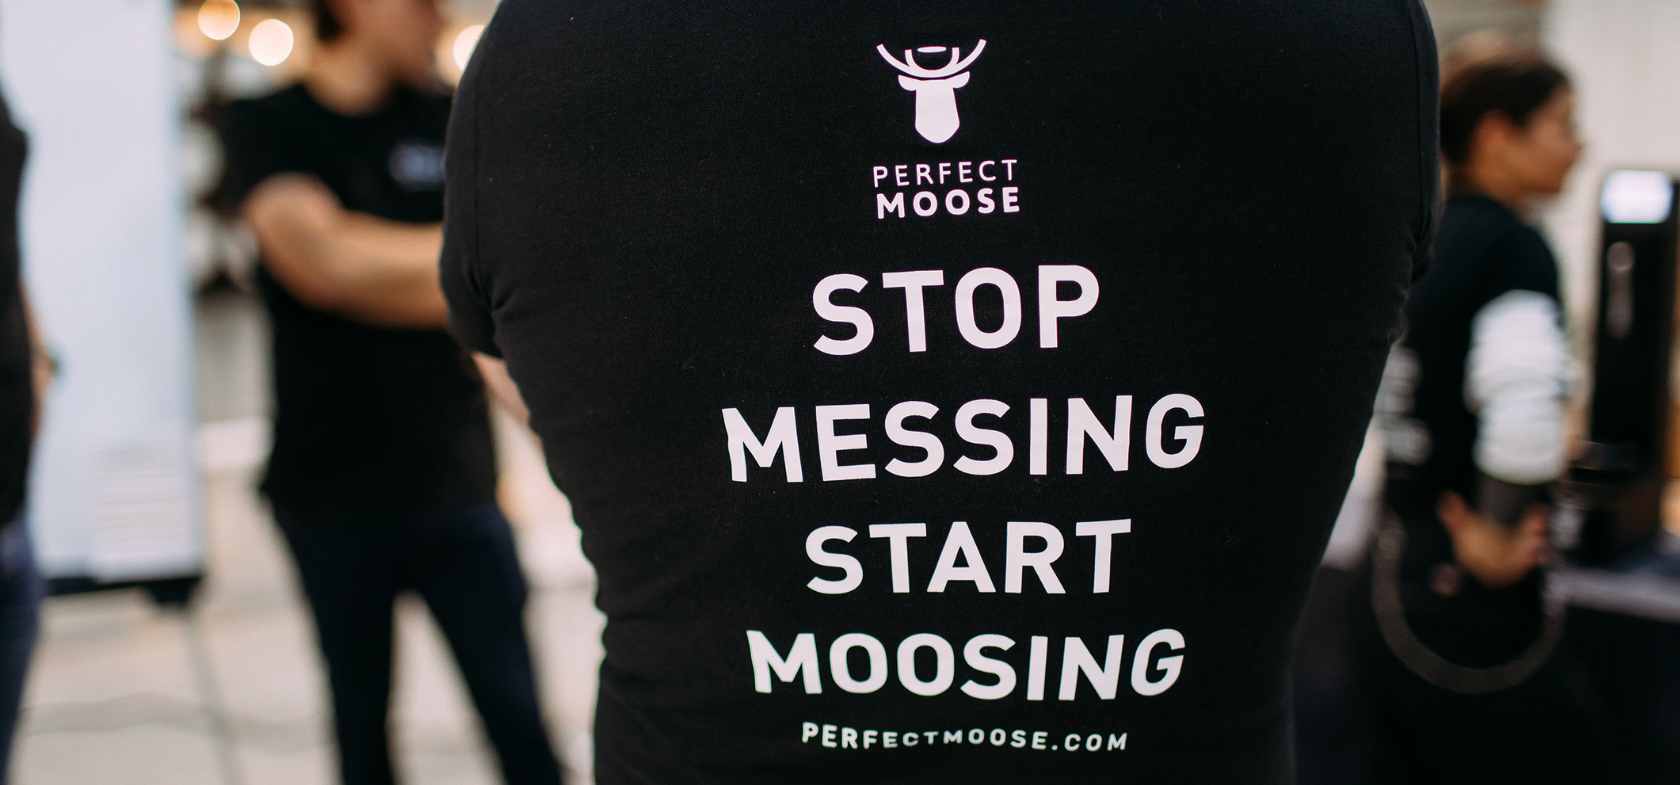 Events & fairs to spot a Perfect Moose